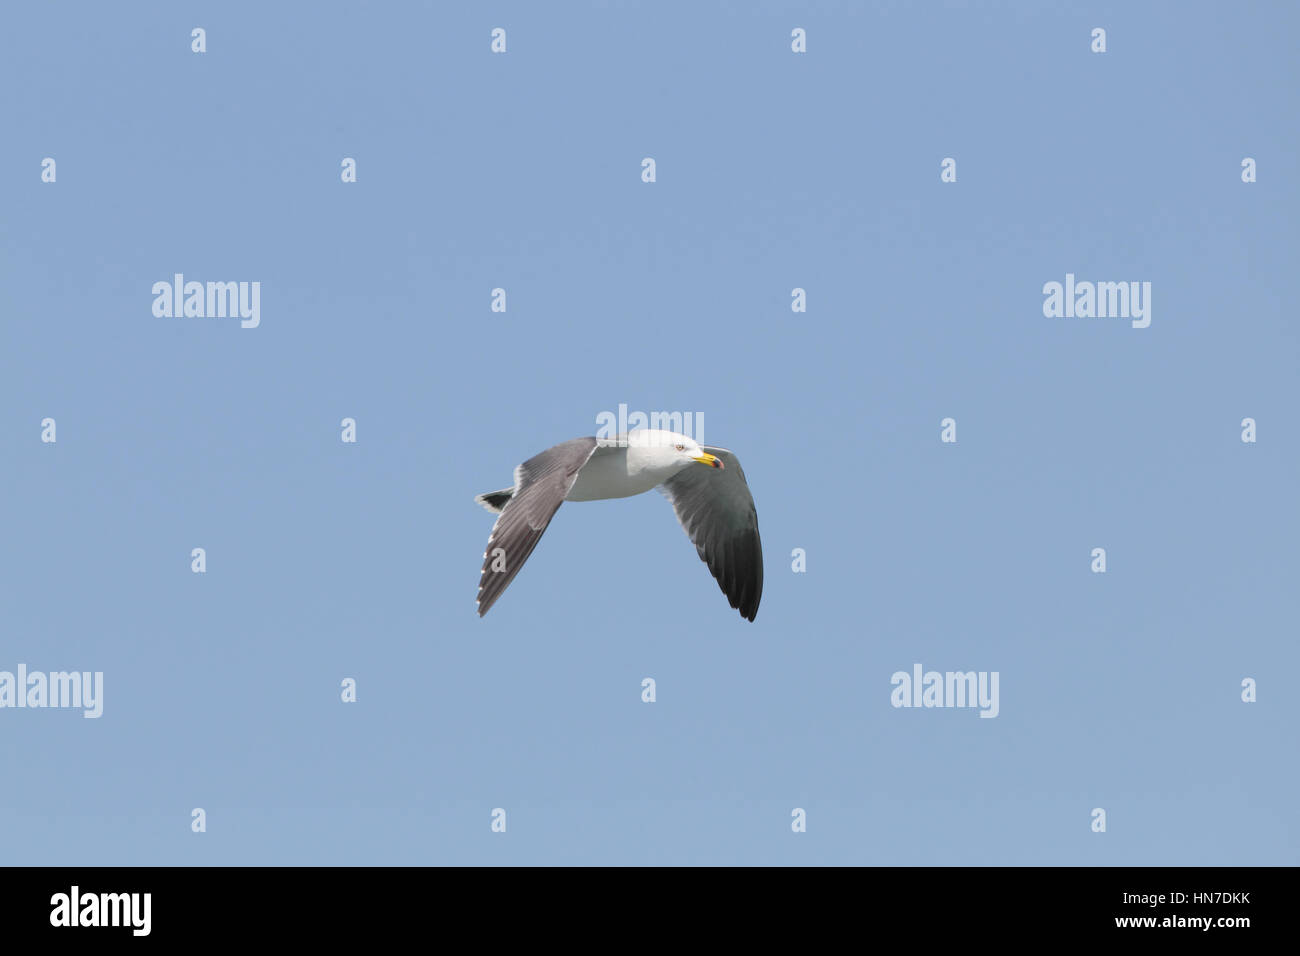 Adult Black-tailed Gull (Larus crassirostris), in flight, against a clear blue sky Stock Photo